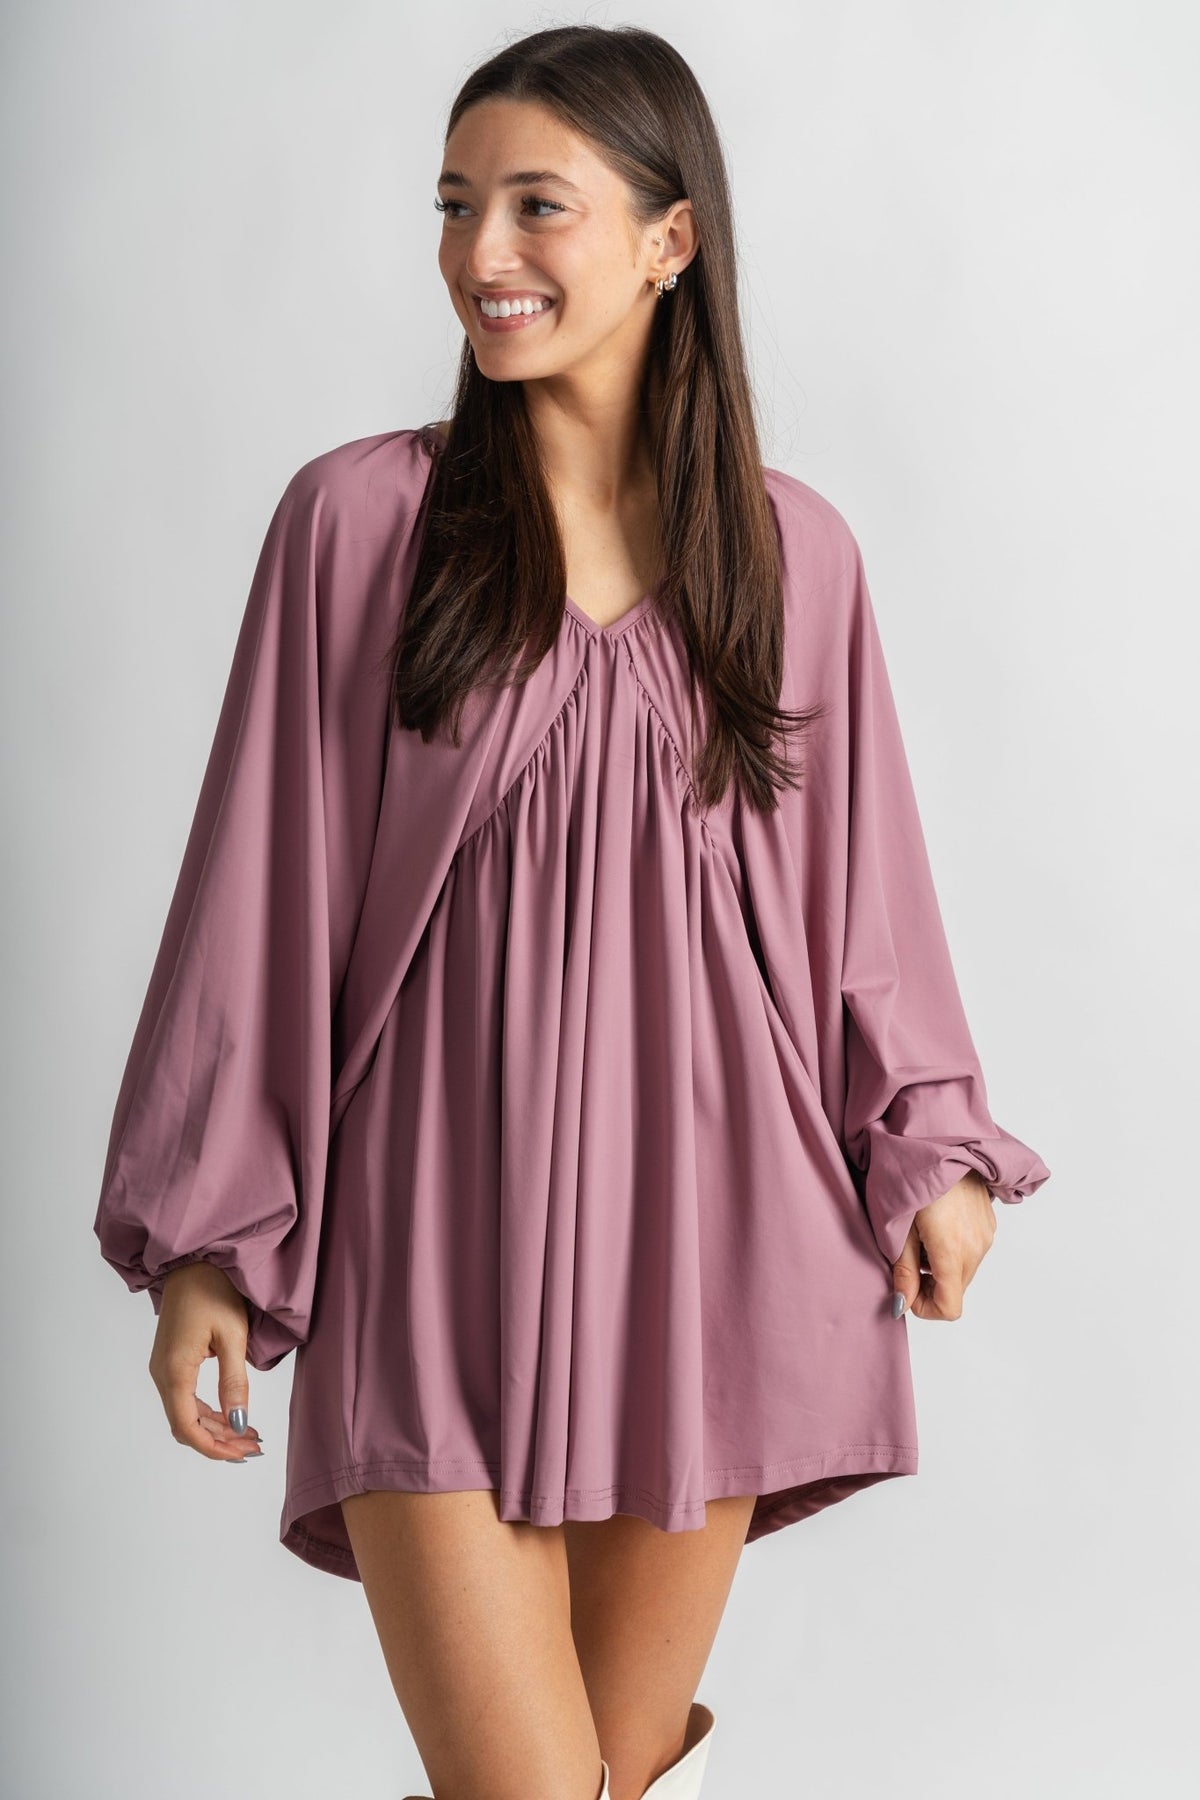 Angelica v-neck dress mauve - Cute dress - Trendy Dresses at Lush Fashion Lounge Boutique in Oklahoma City